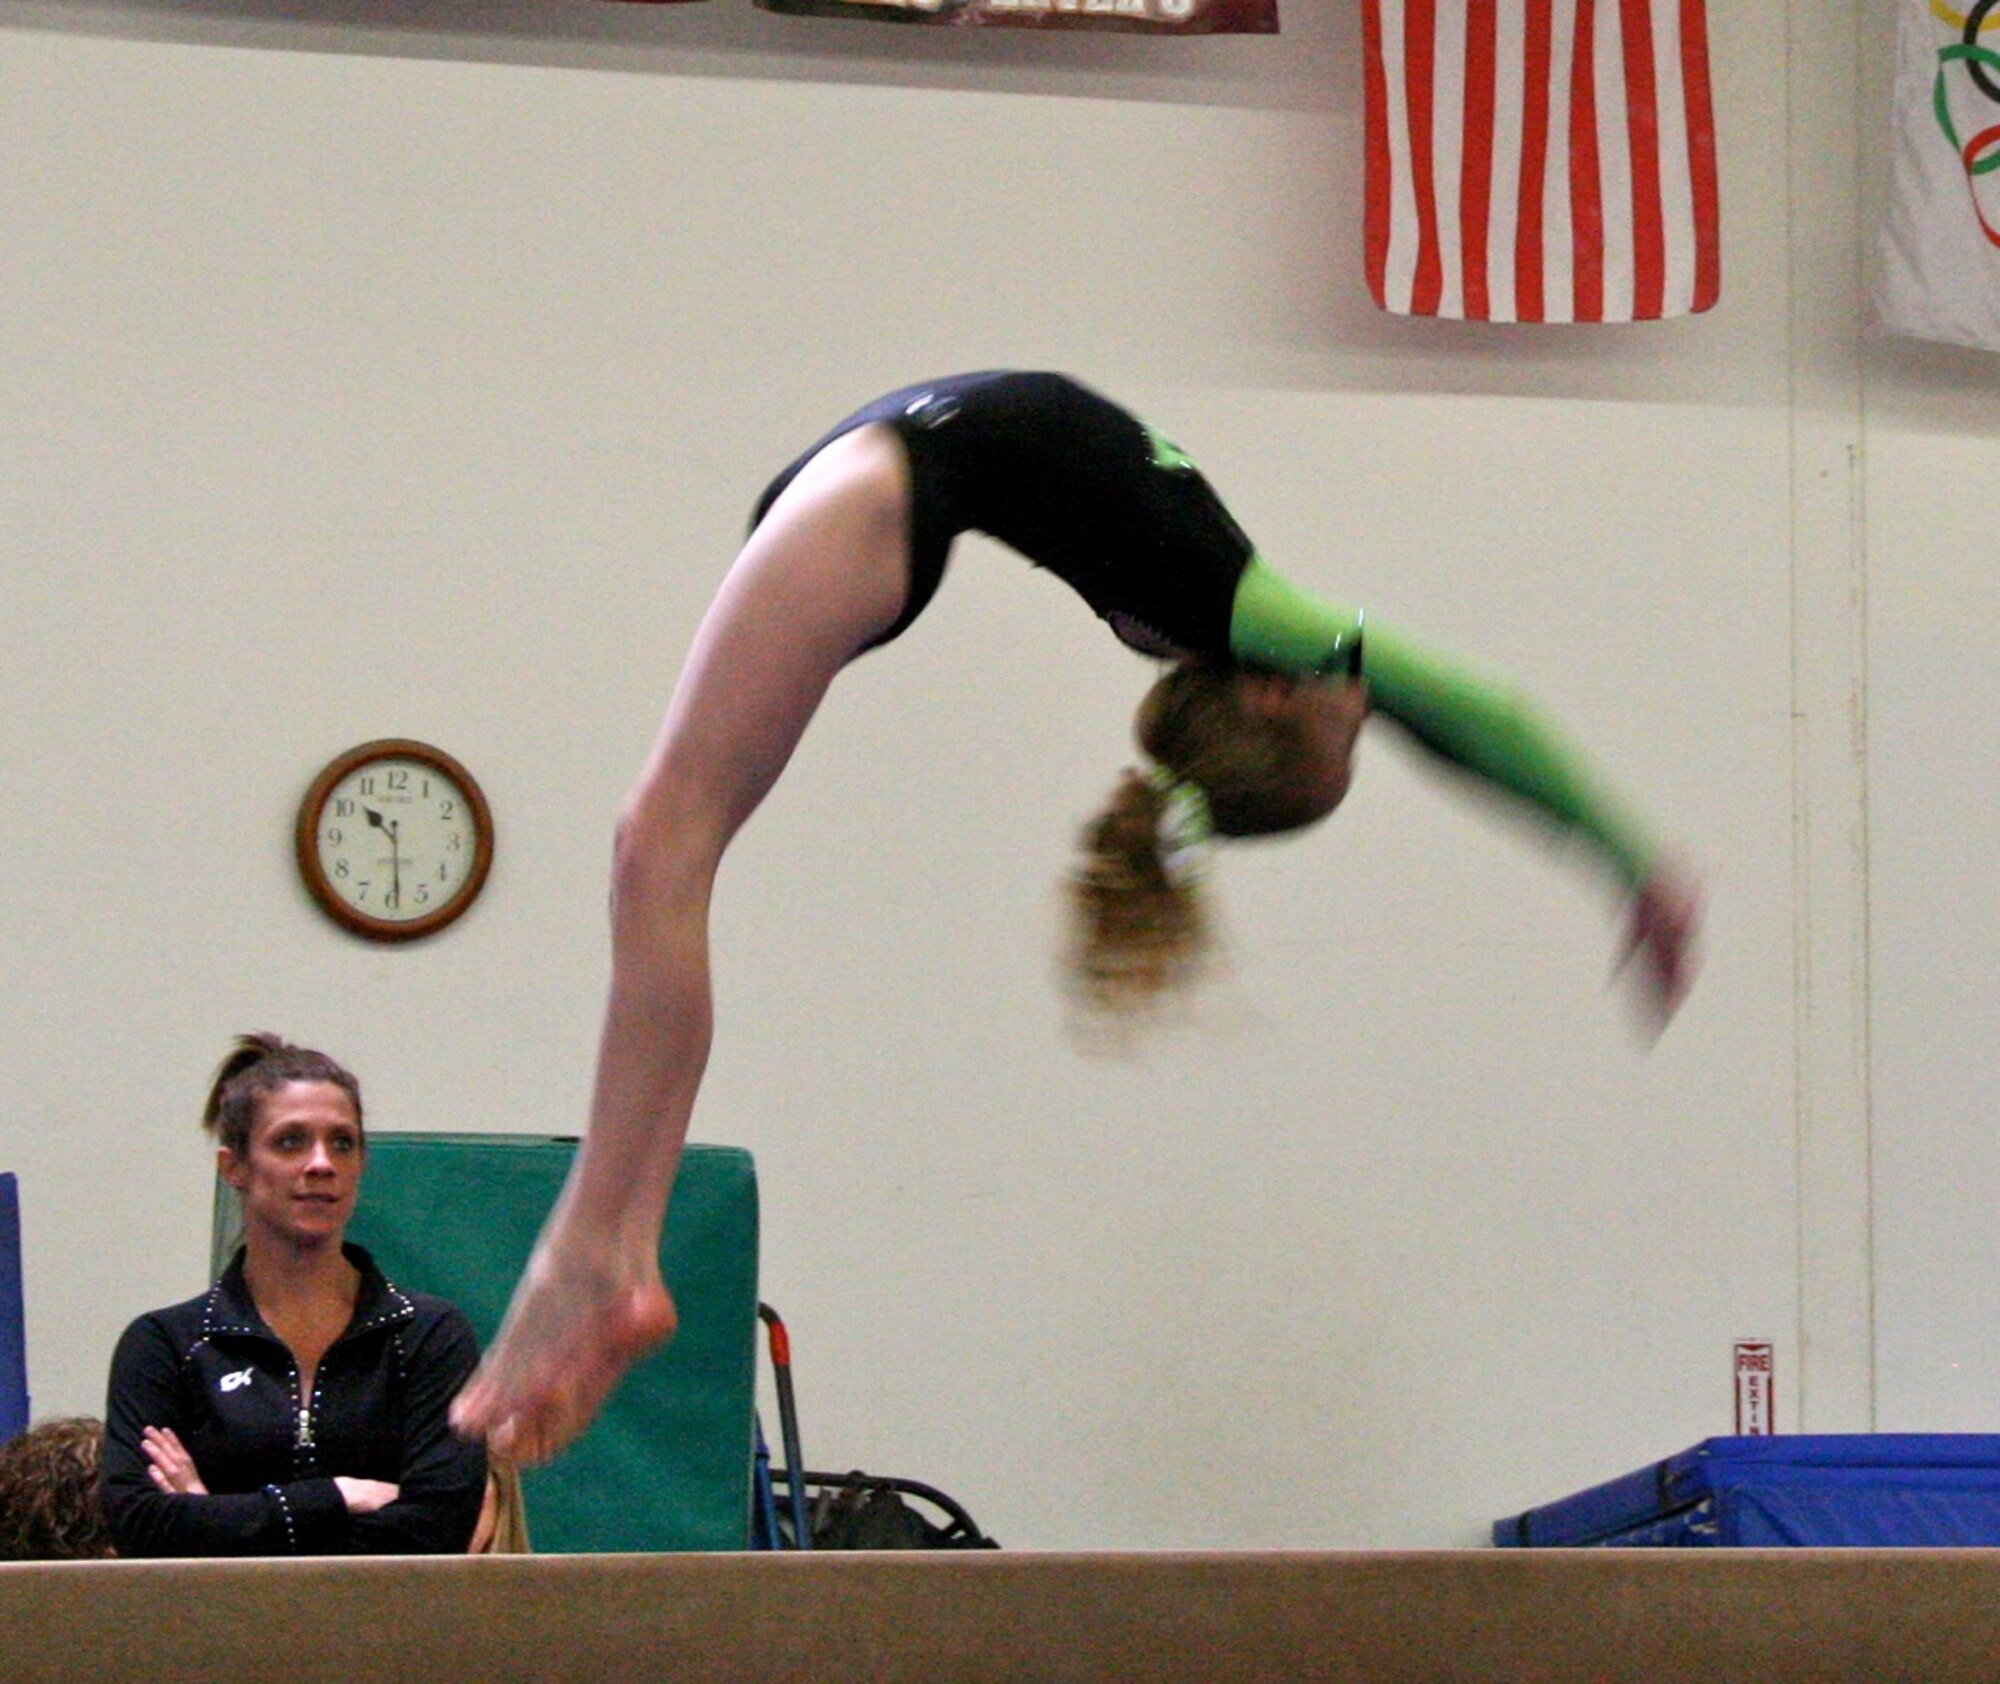 CAMARILLO, Calif. --  Ashley Castellenos, age 13, performs on balance beam at the Snowflake Classic gymnastics competition here Feb. 7 as Coach Allison Pledger watches. Castellenos is with the Vandenberg Youth Programs Jets girls gymnastics Level 7 team. (Photo by Cheryl Castellenos)